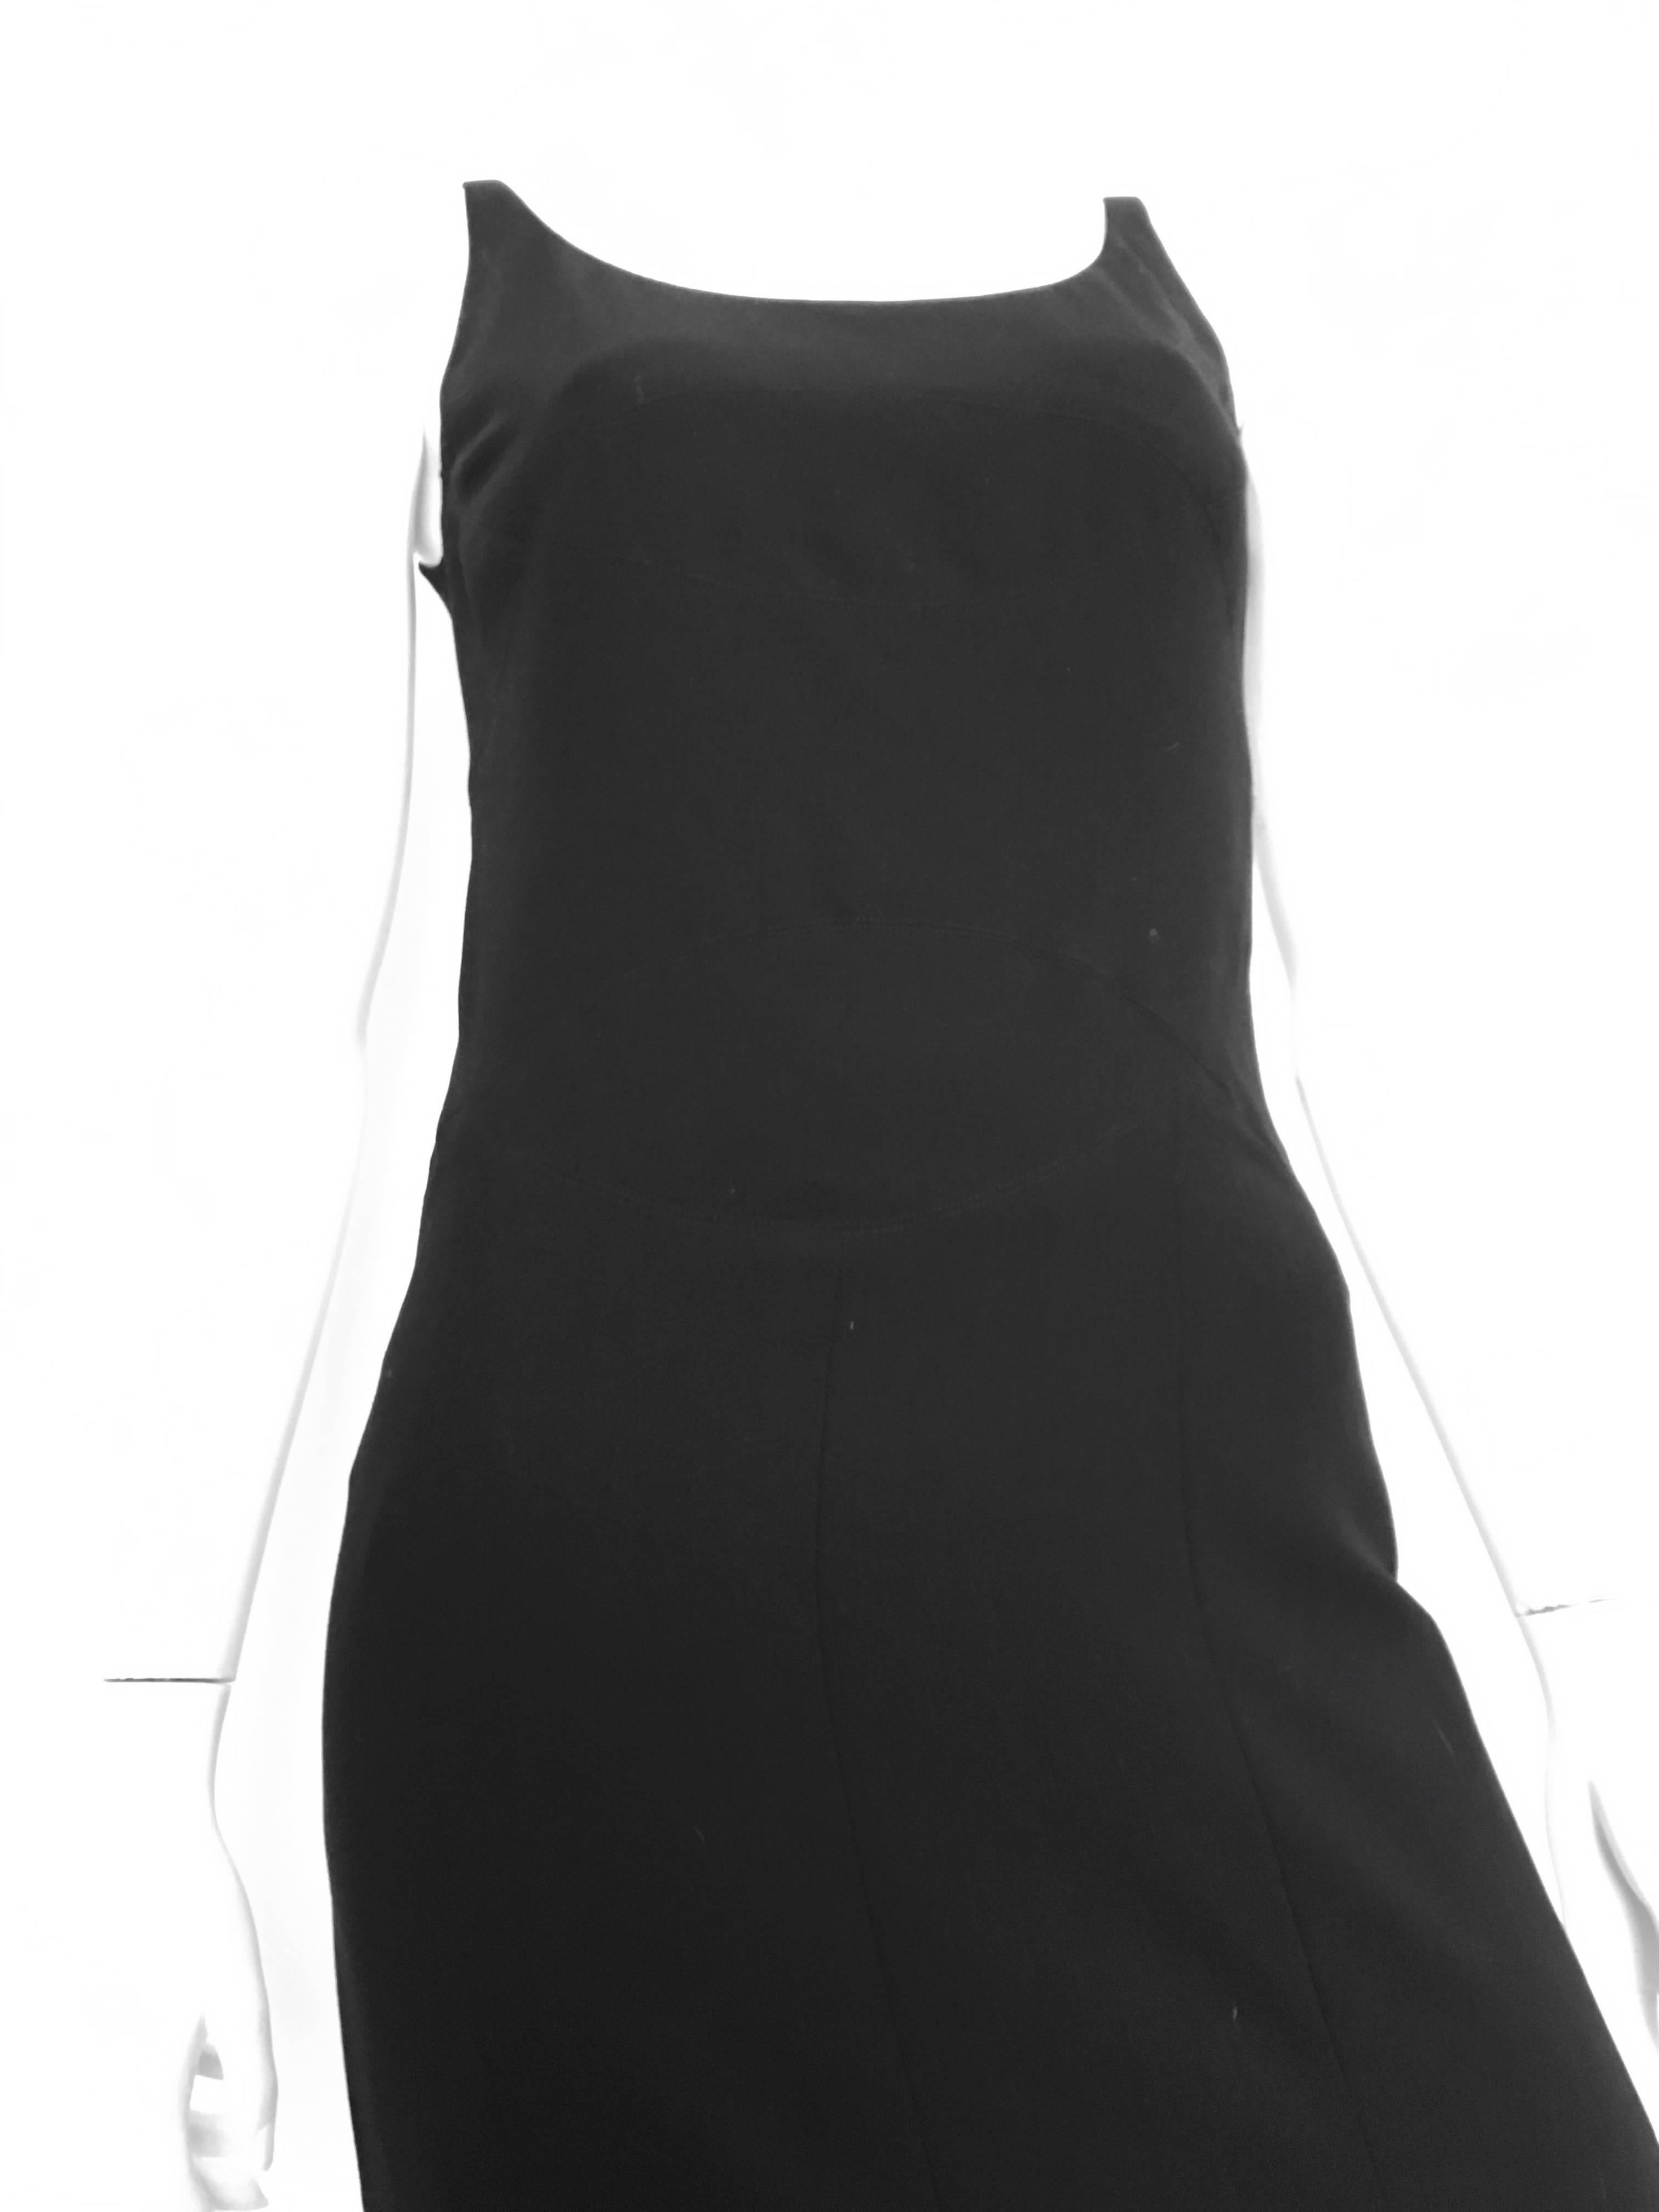 Chanel Maxi Black Wool Sleeveless Dress Size 6  For Sale 1